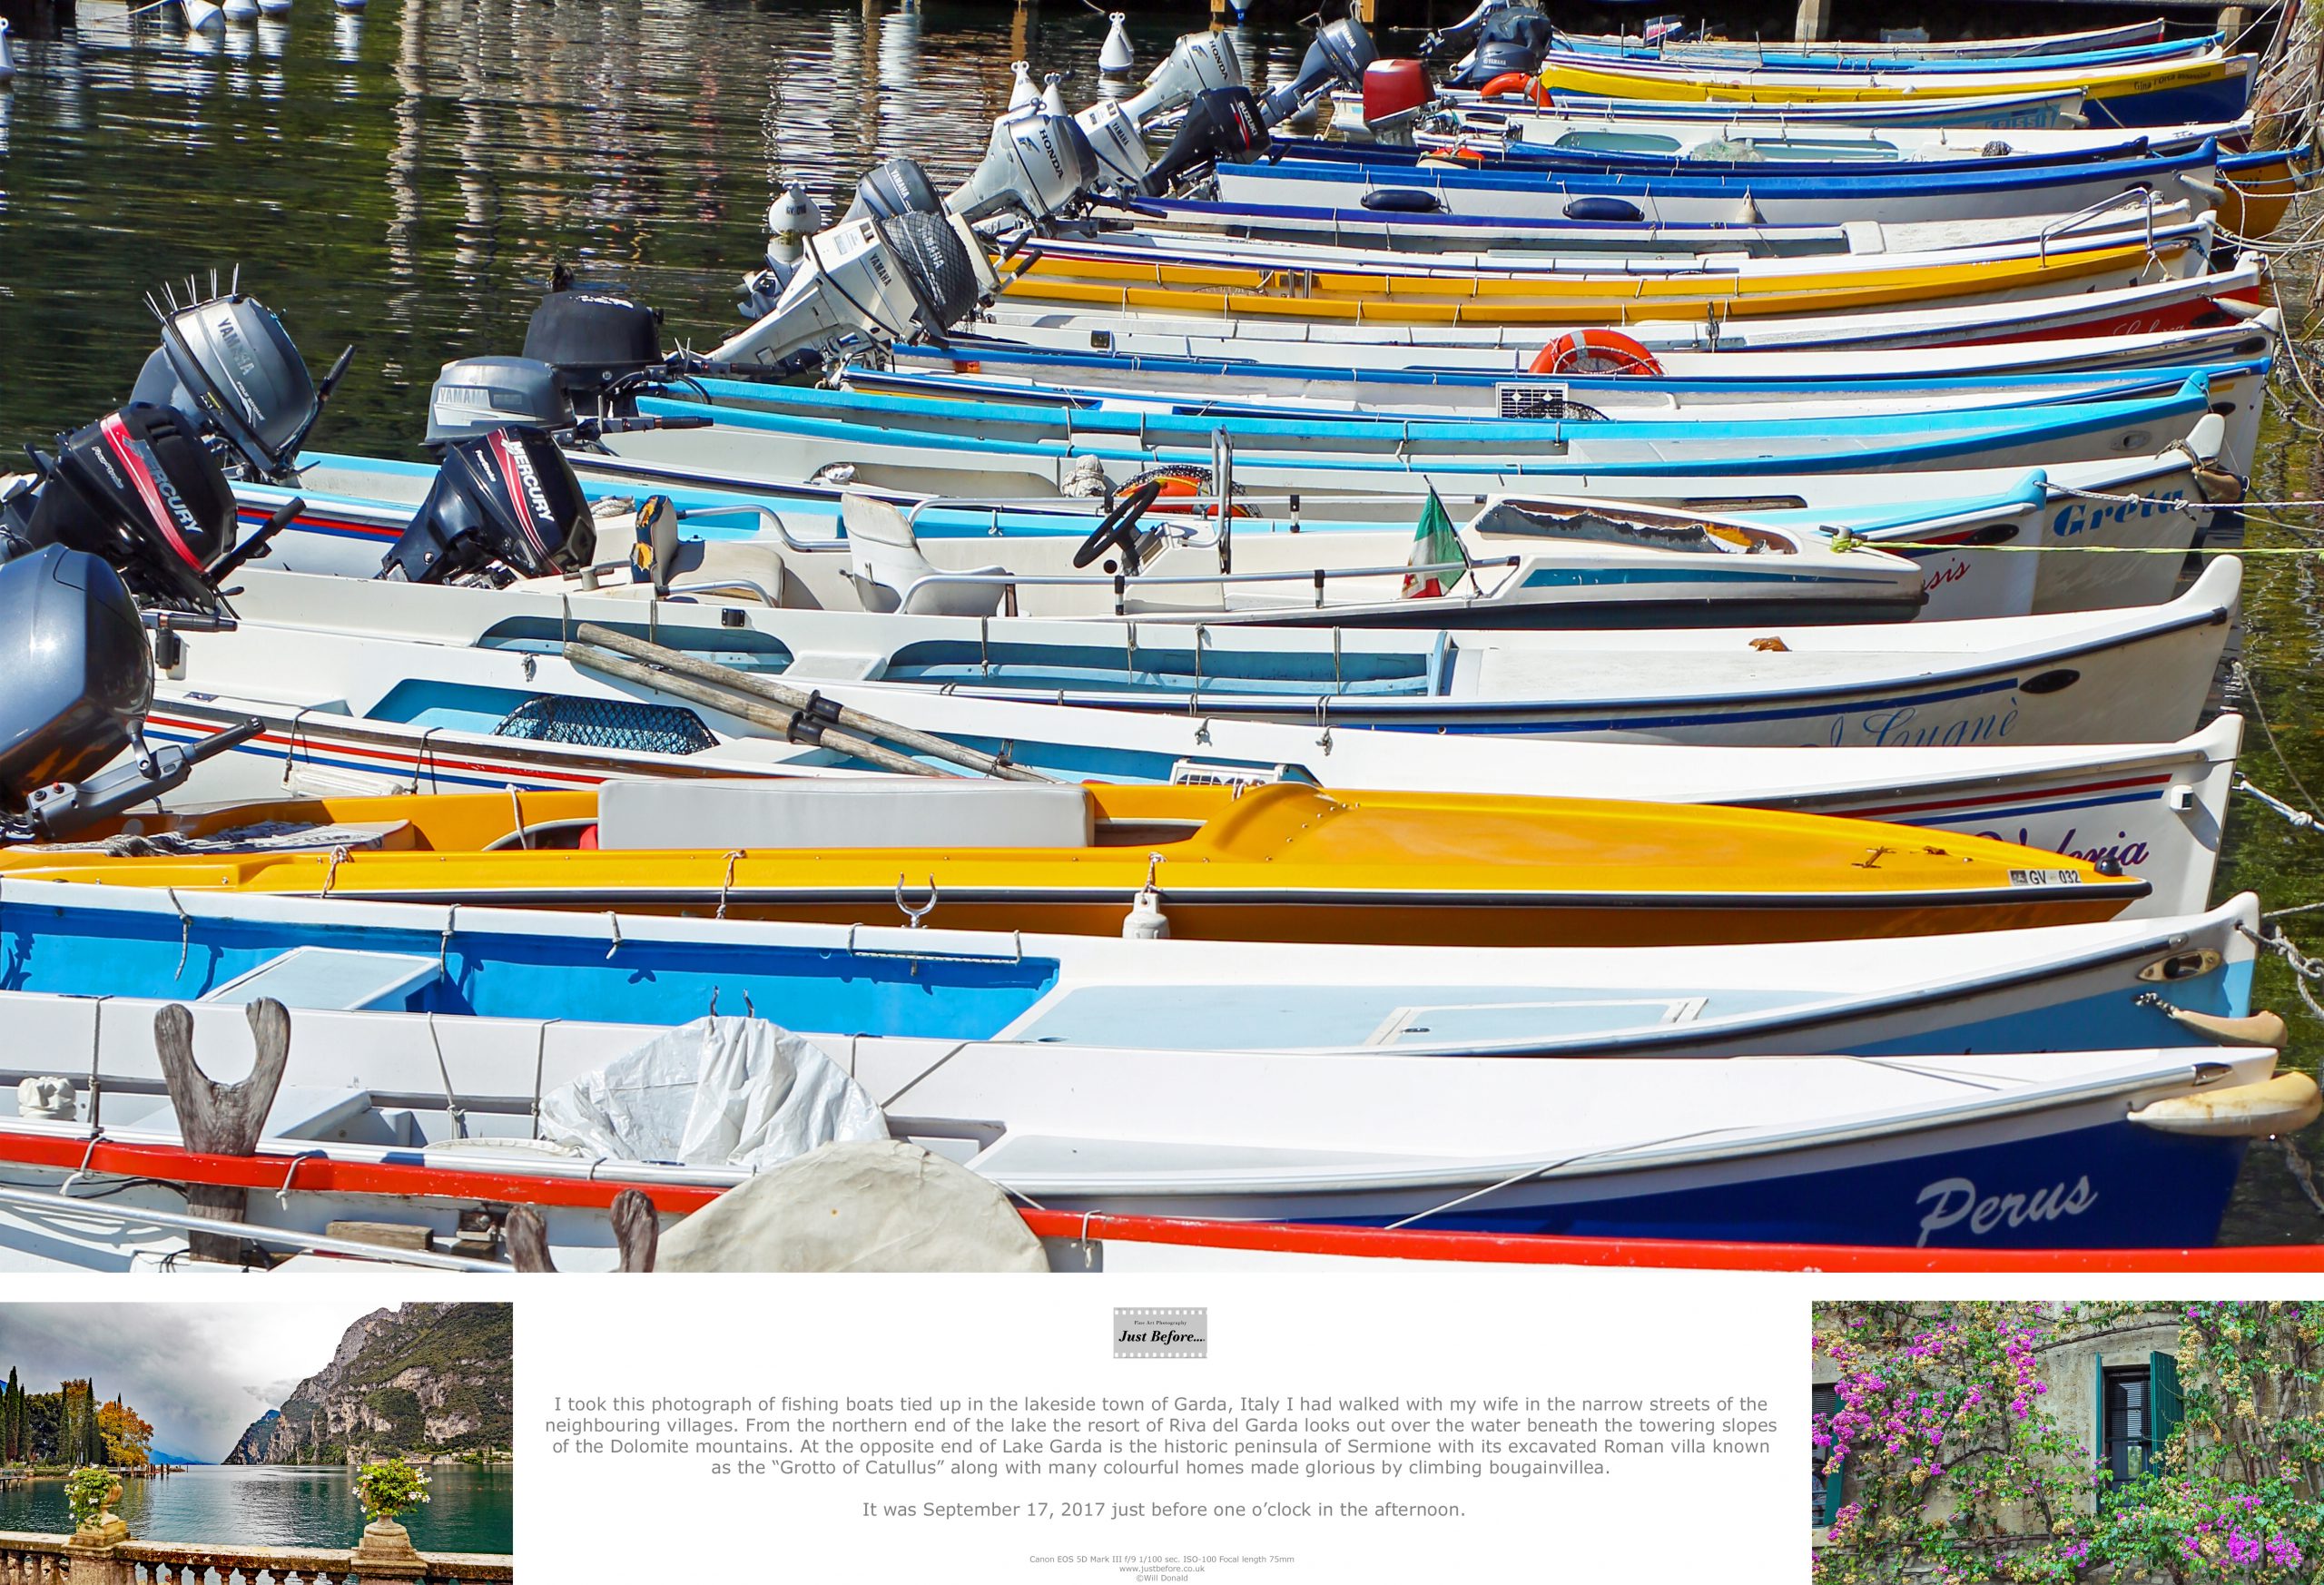 Collection of Photography from Lake Garda in Italy